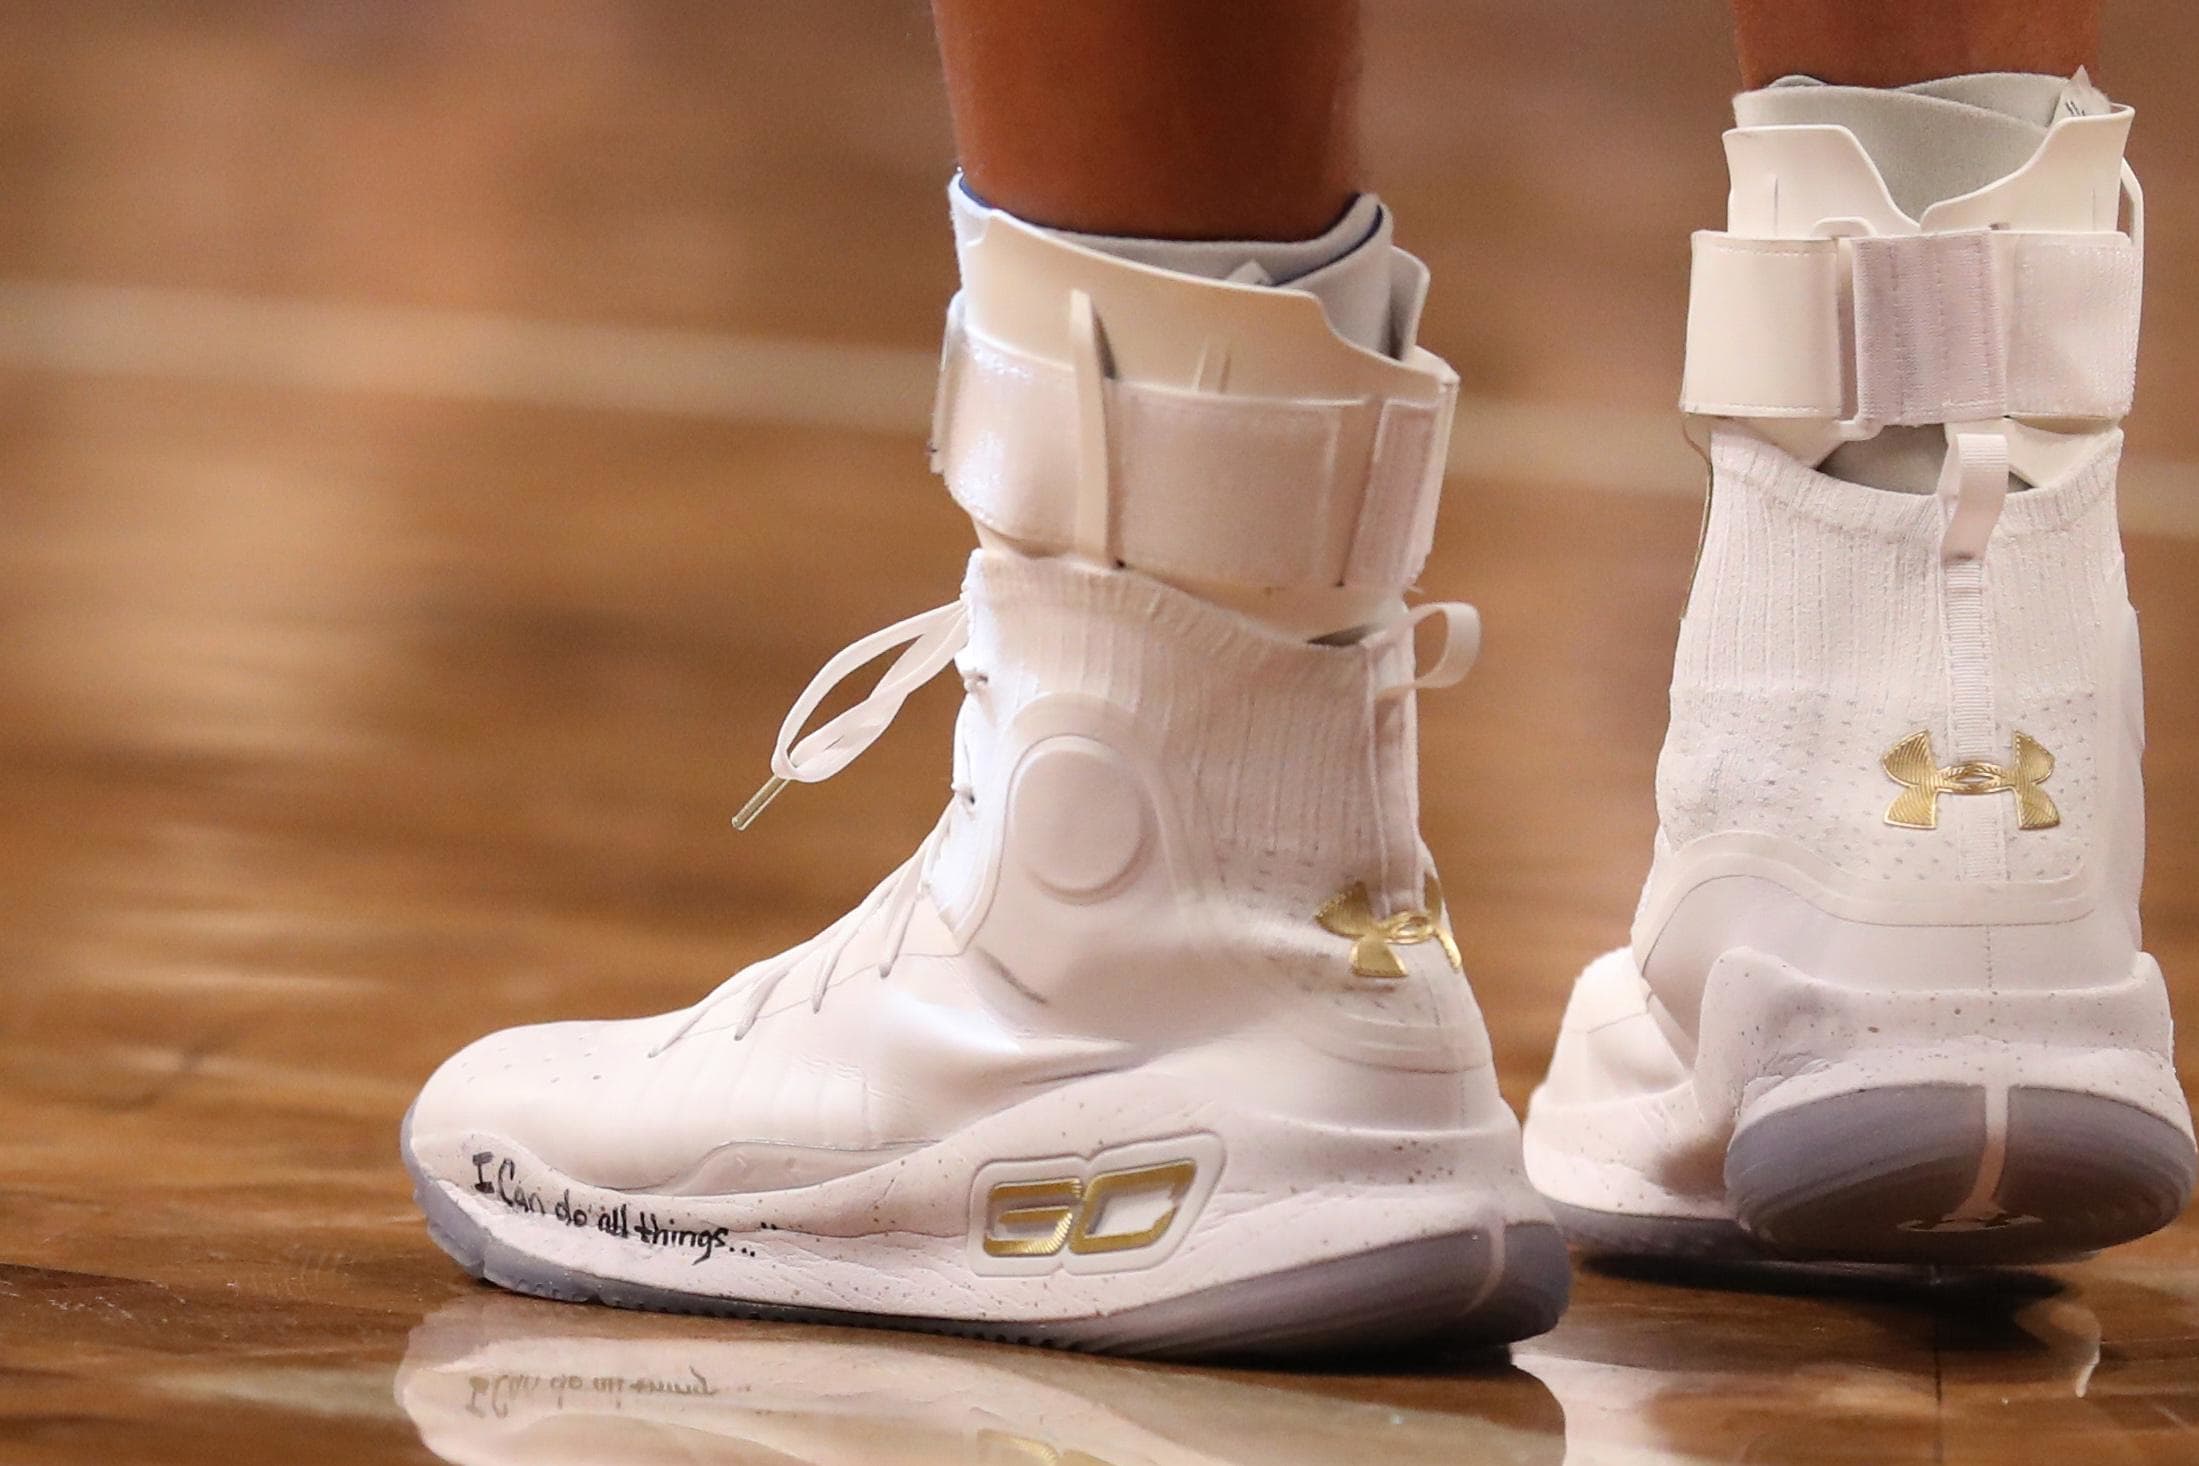 Stephen Curry's white and gold Under Armour shoes.